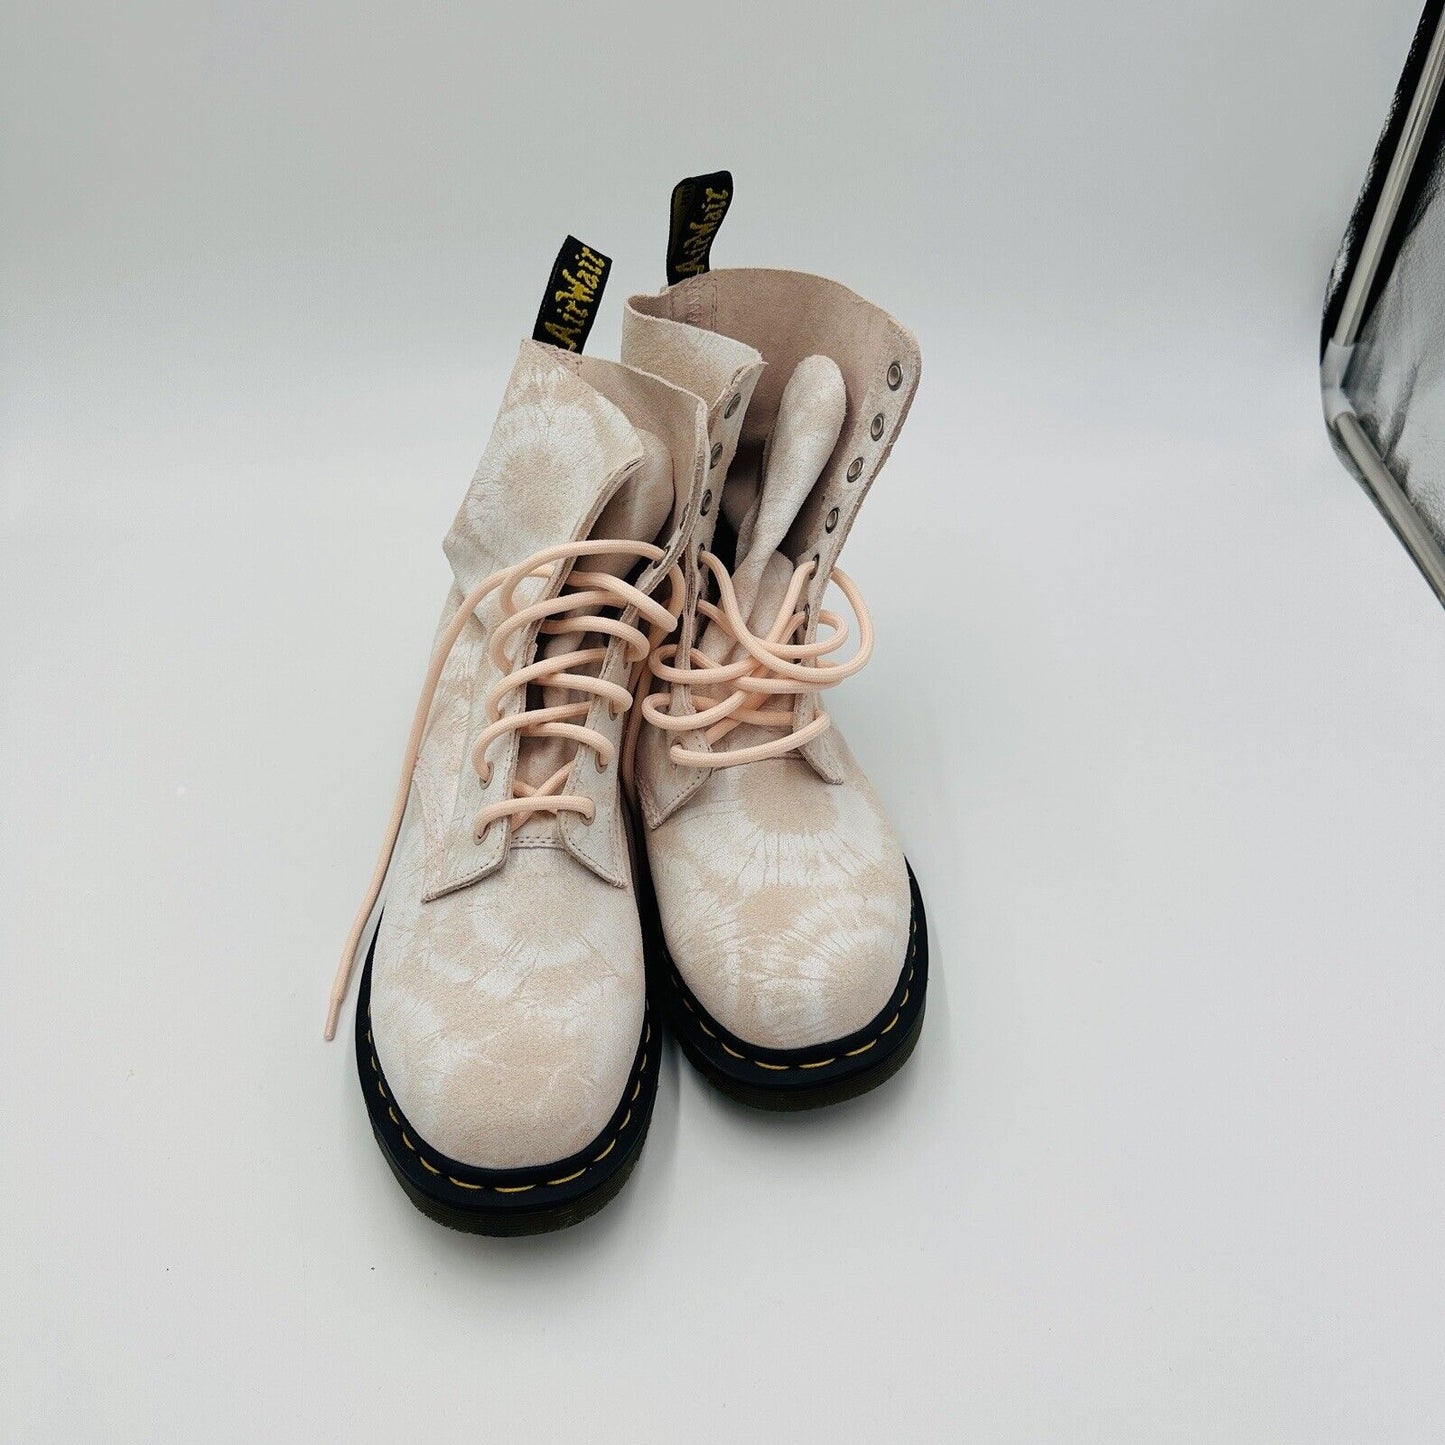 Dr Martens Women's Size 10 Tie Dye Boots Leather Pink White Shoes